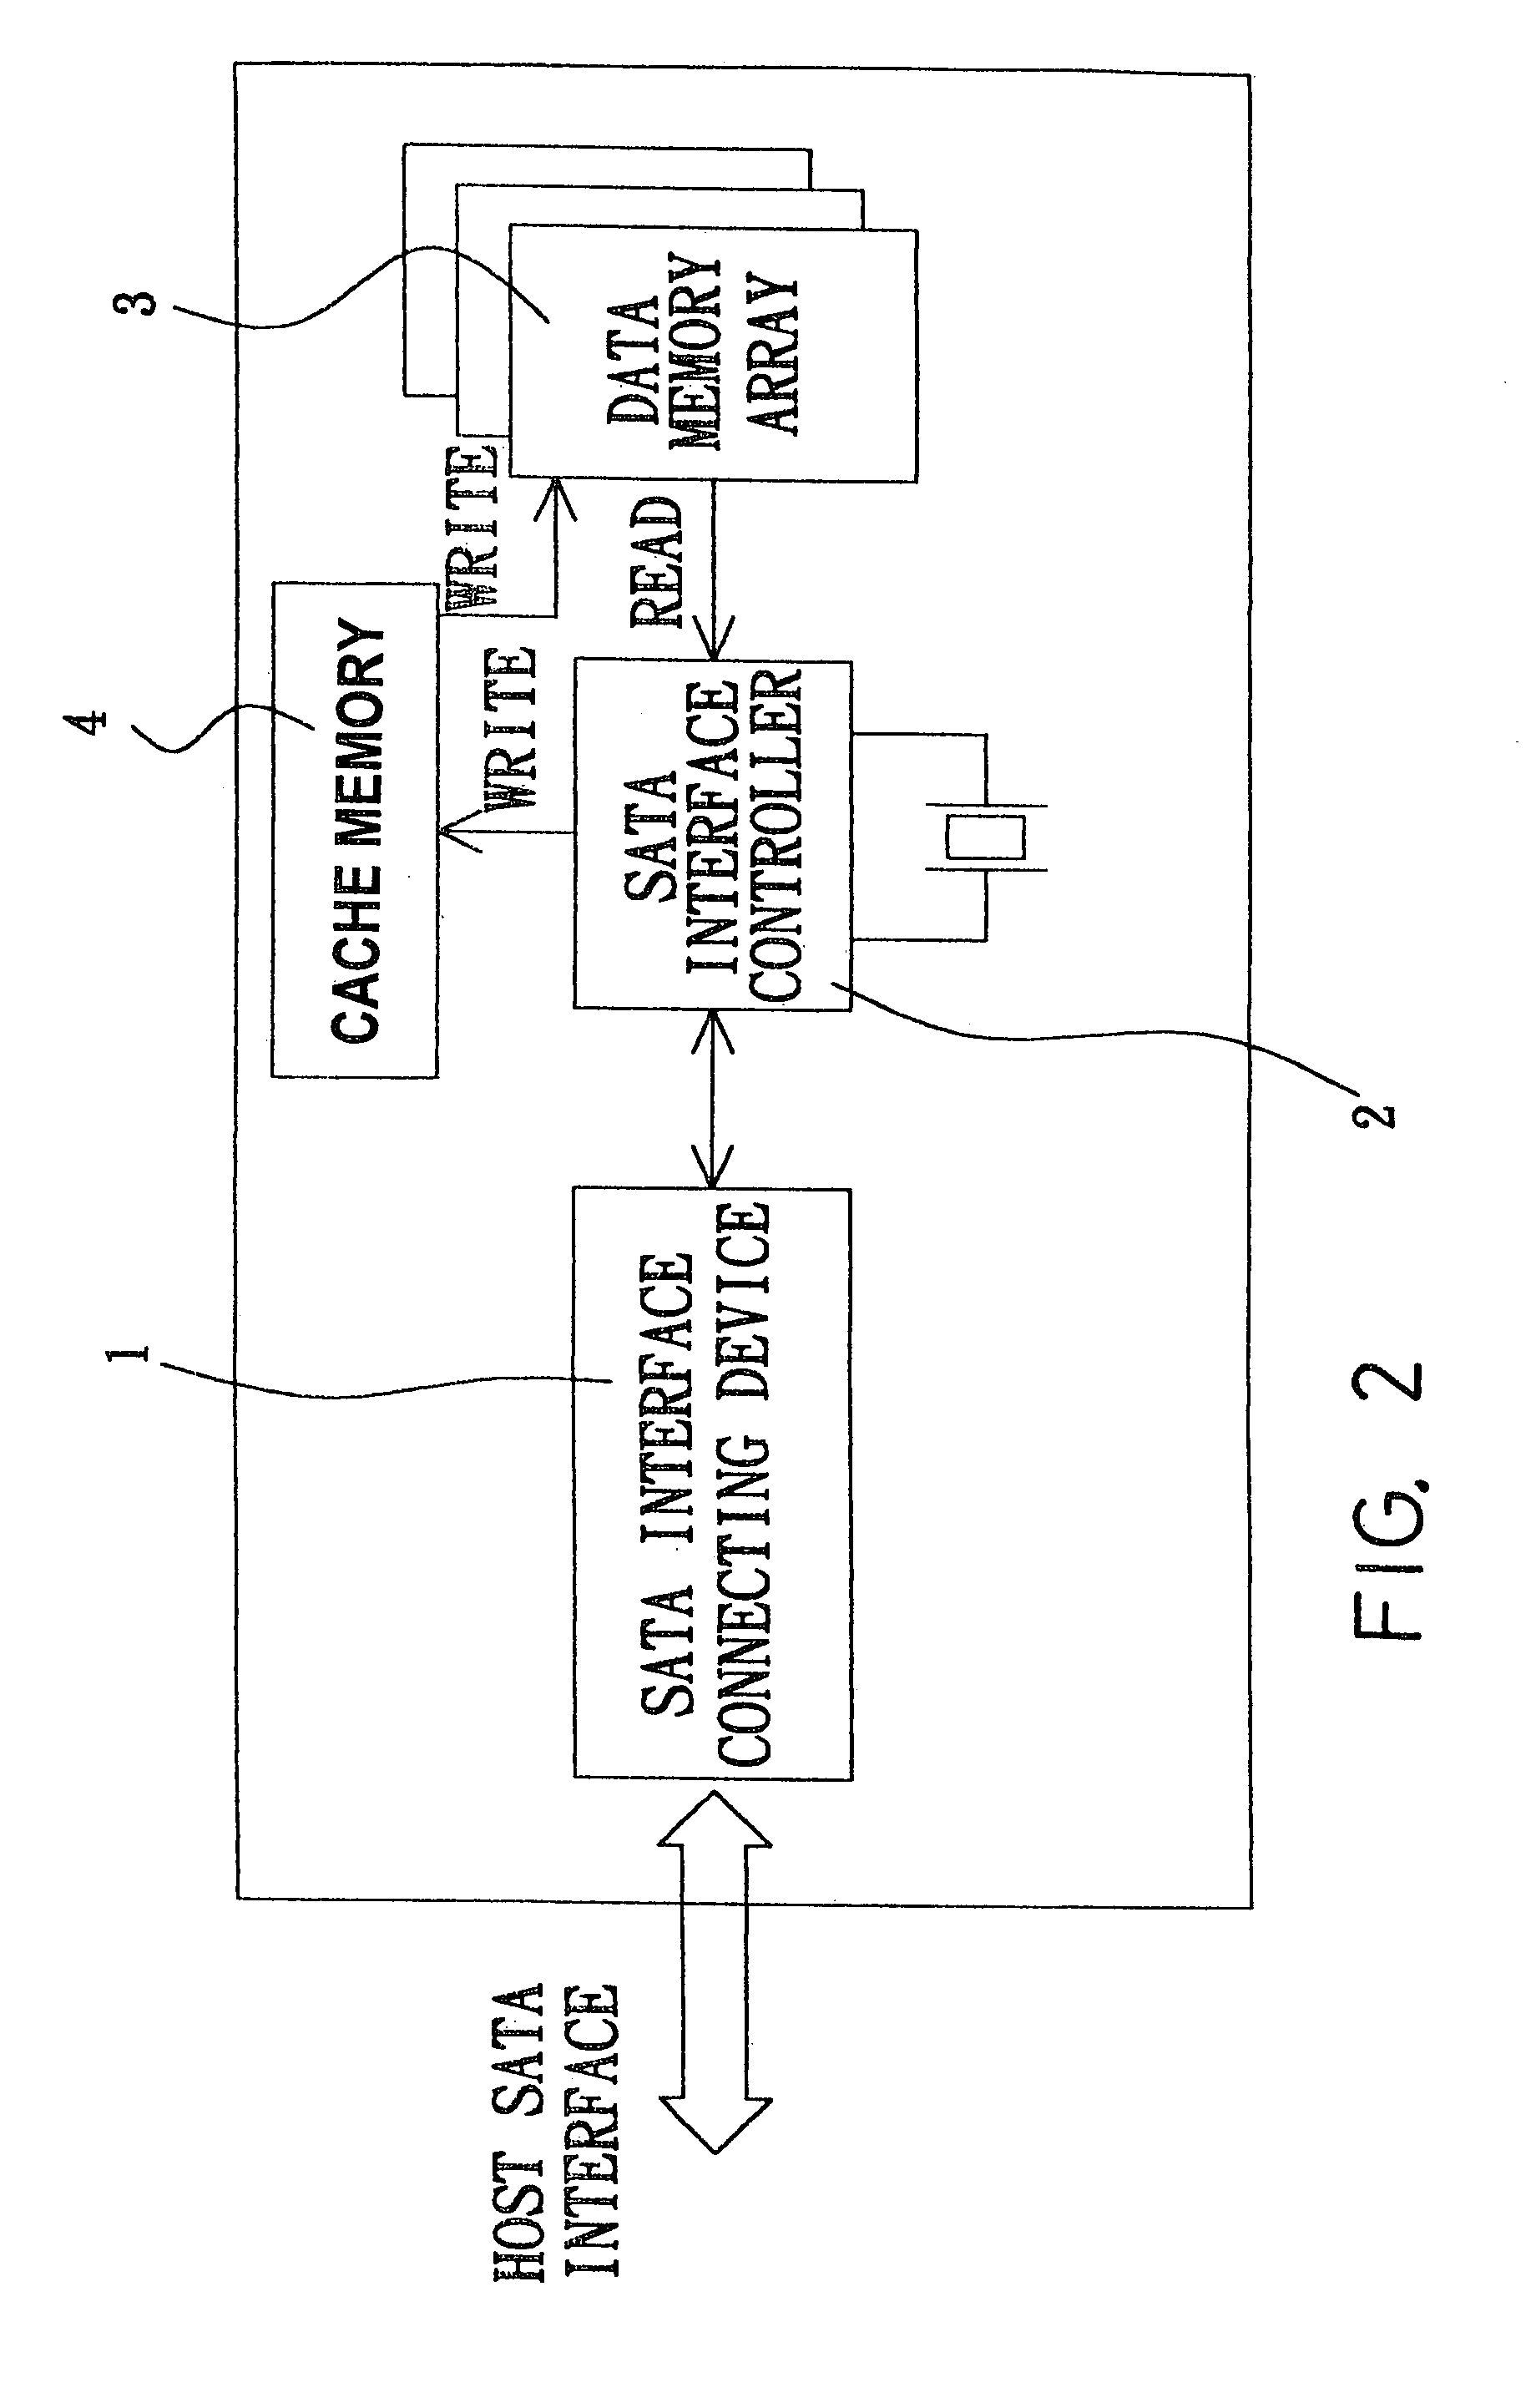 Solid state disk on module with high speed data transmission